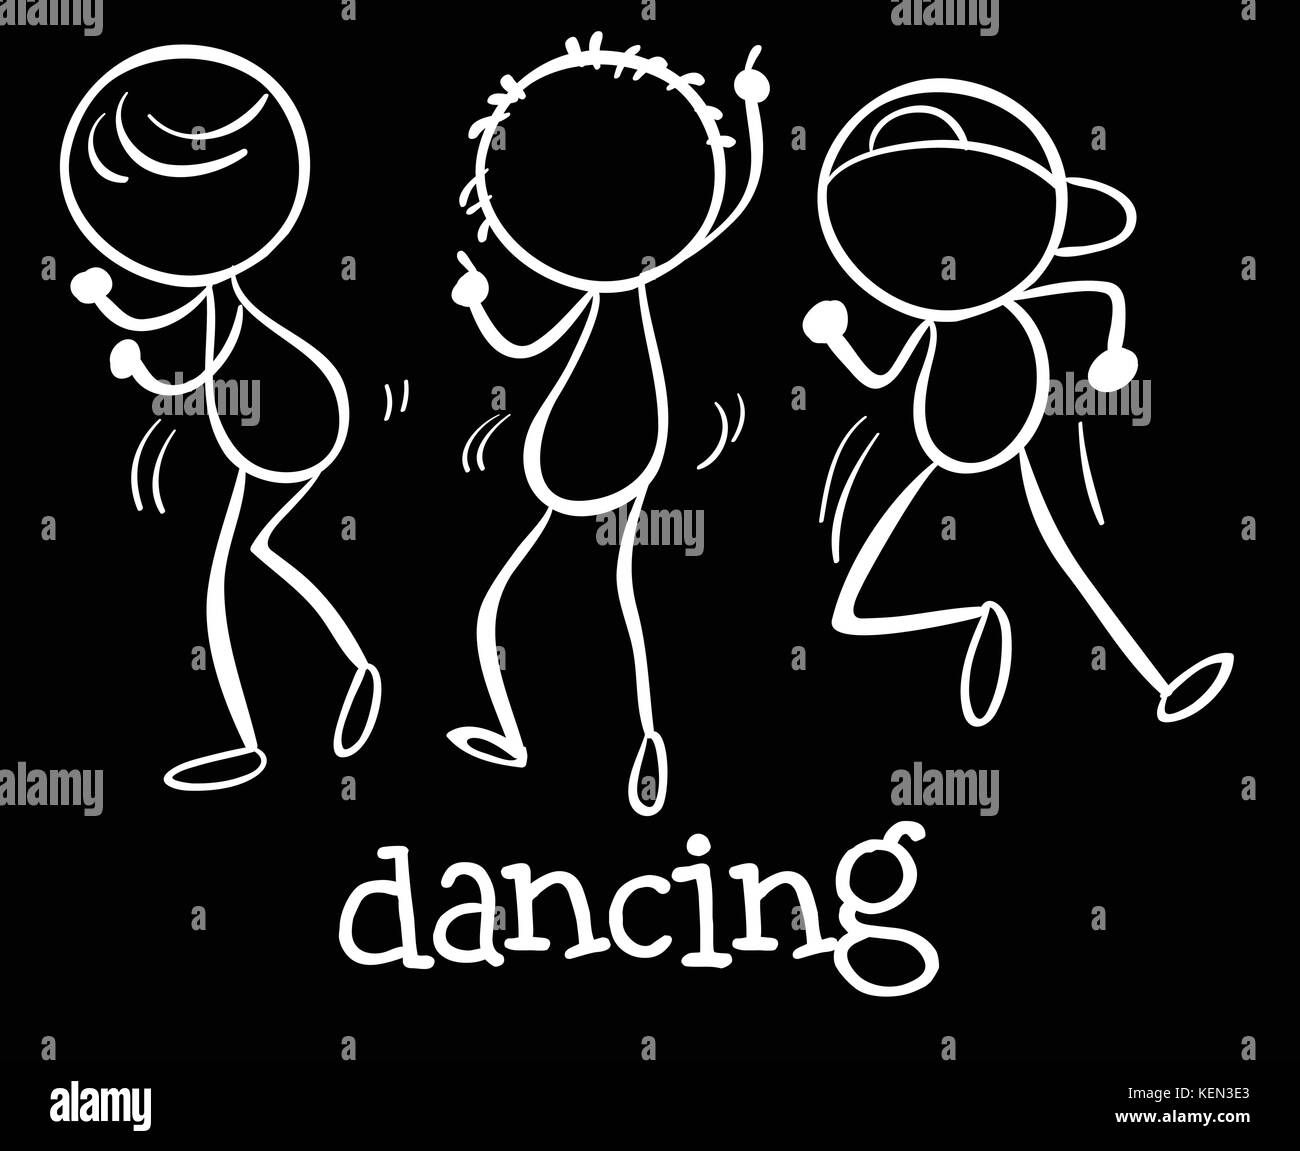 Illustration of people dancing together Stock Vector